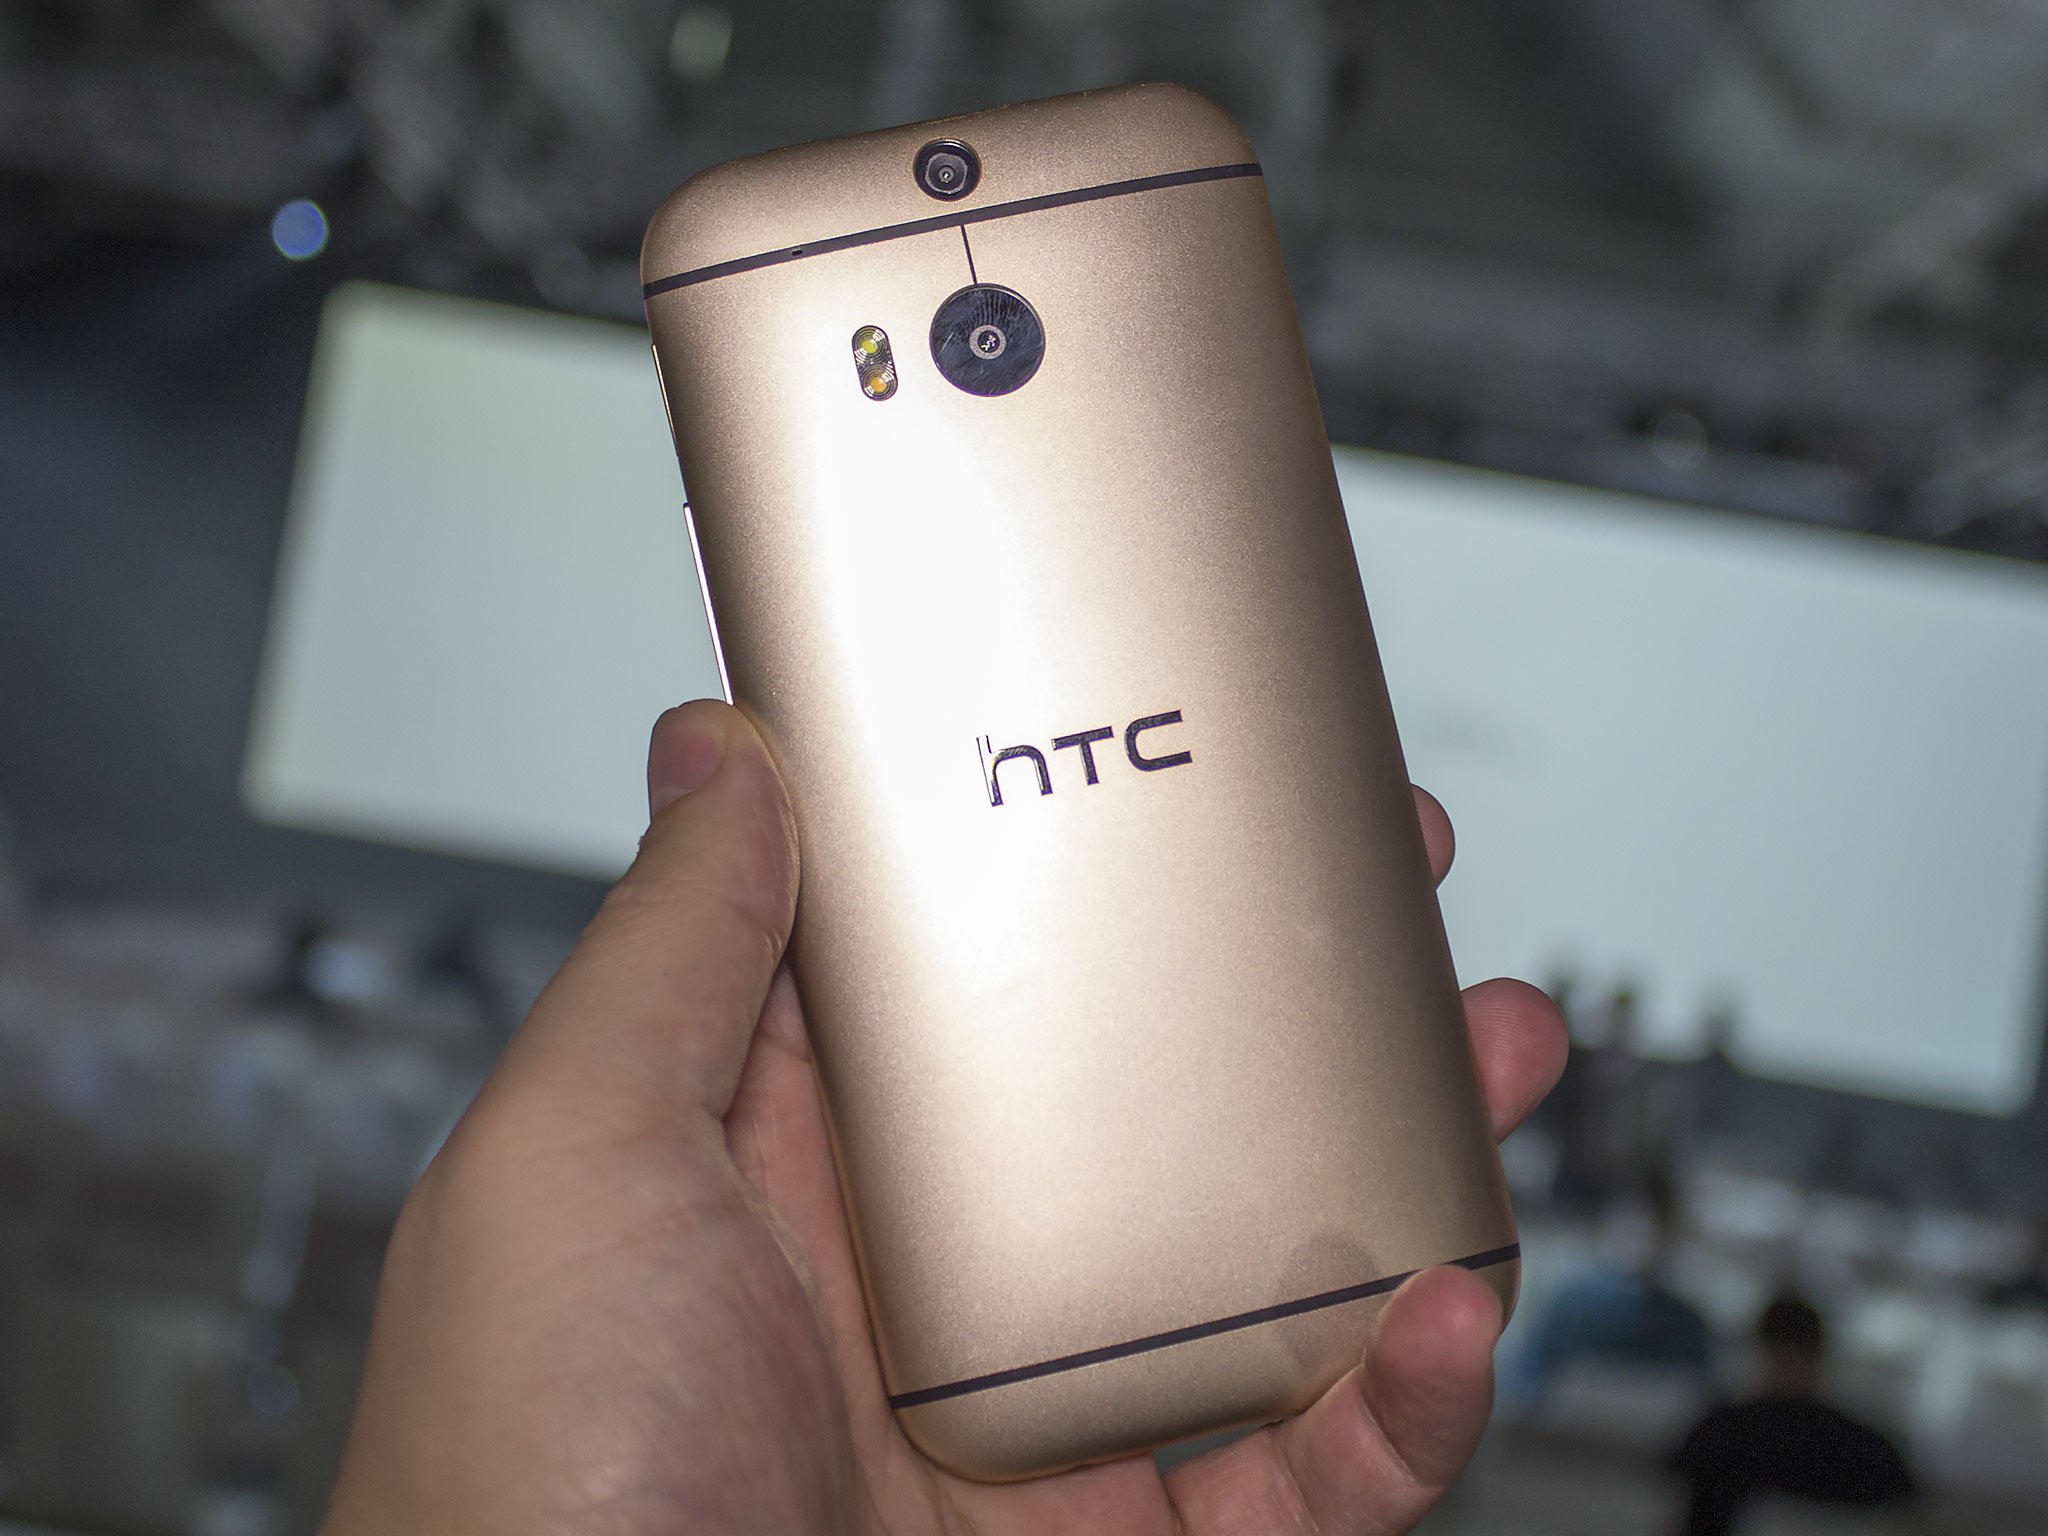 HTC One M8 in Amber Gold